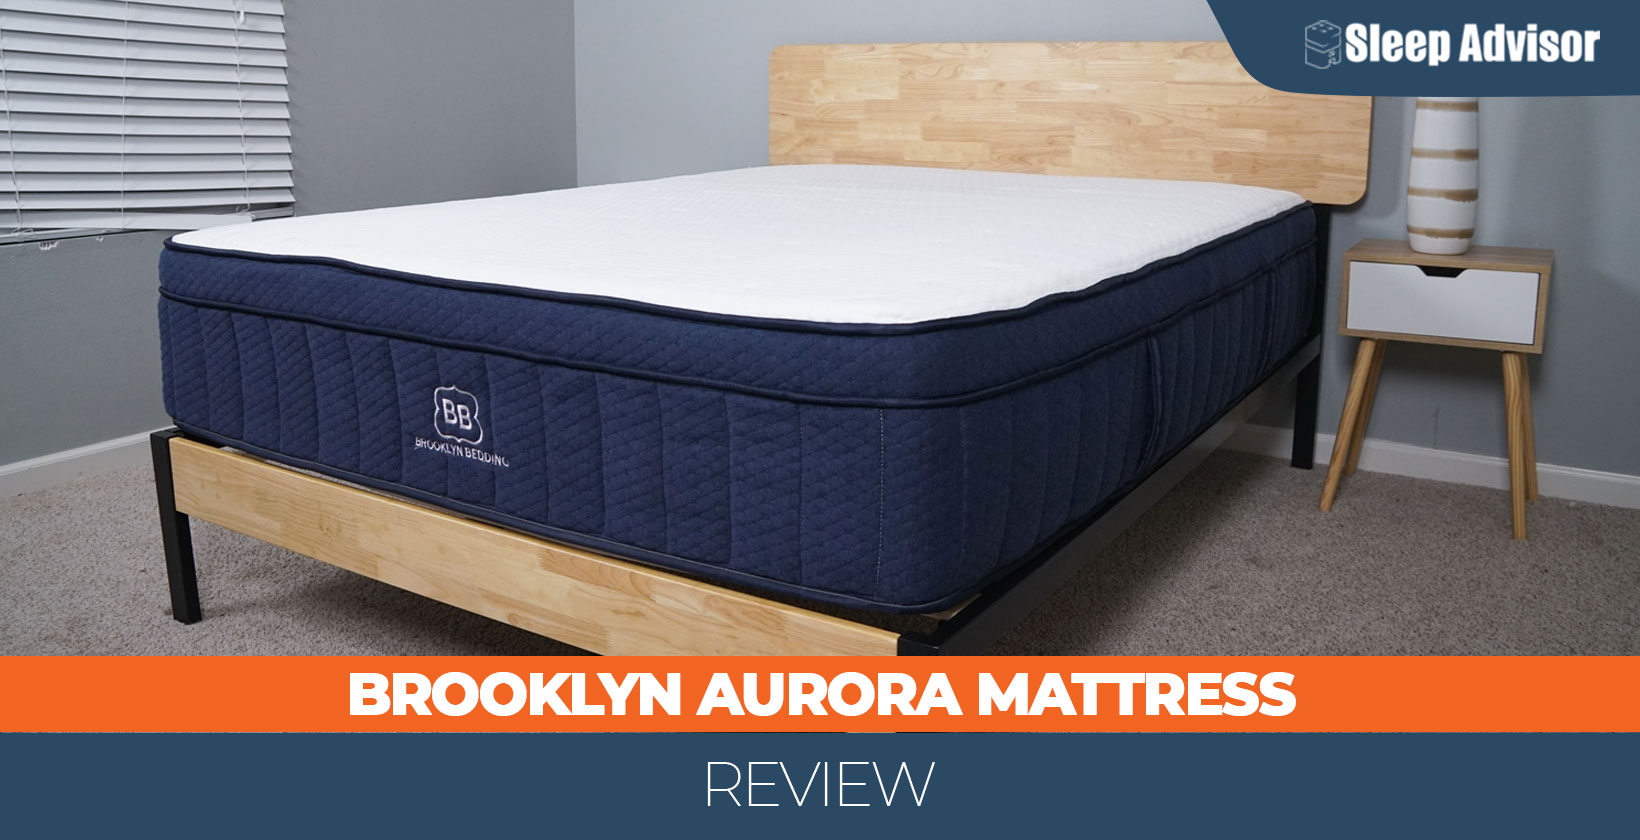 Brooklyn Aurora Mattress Review and Prices